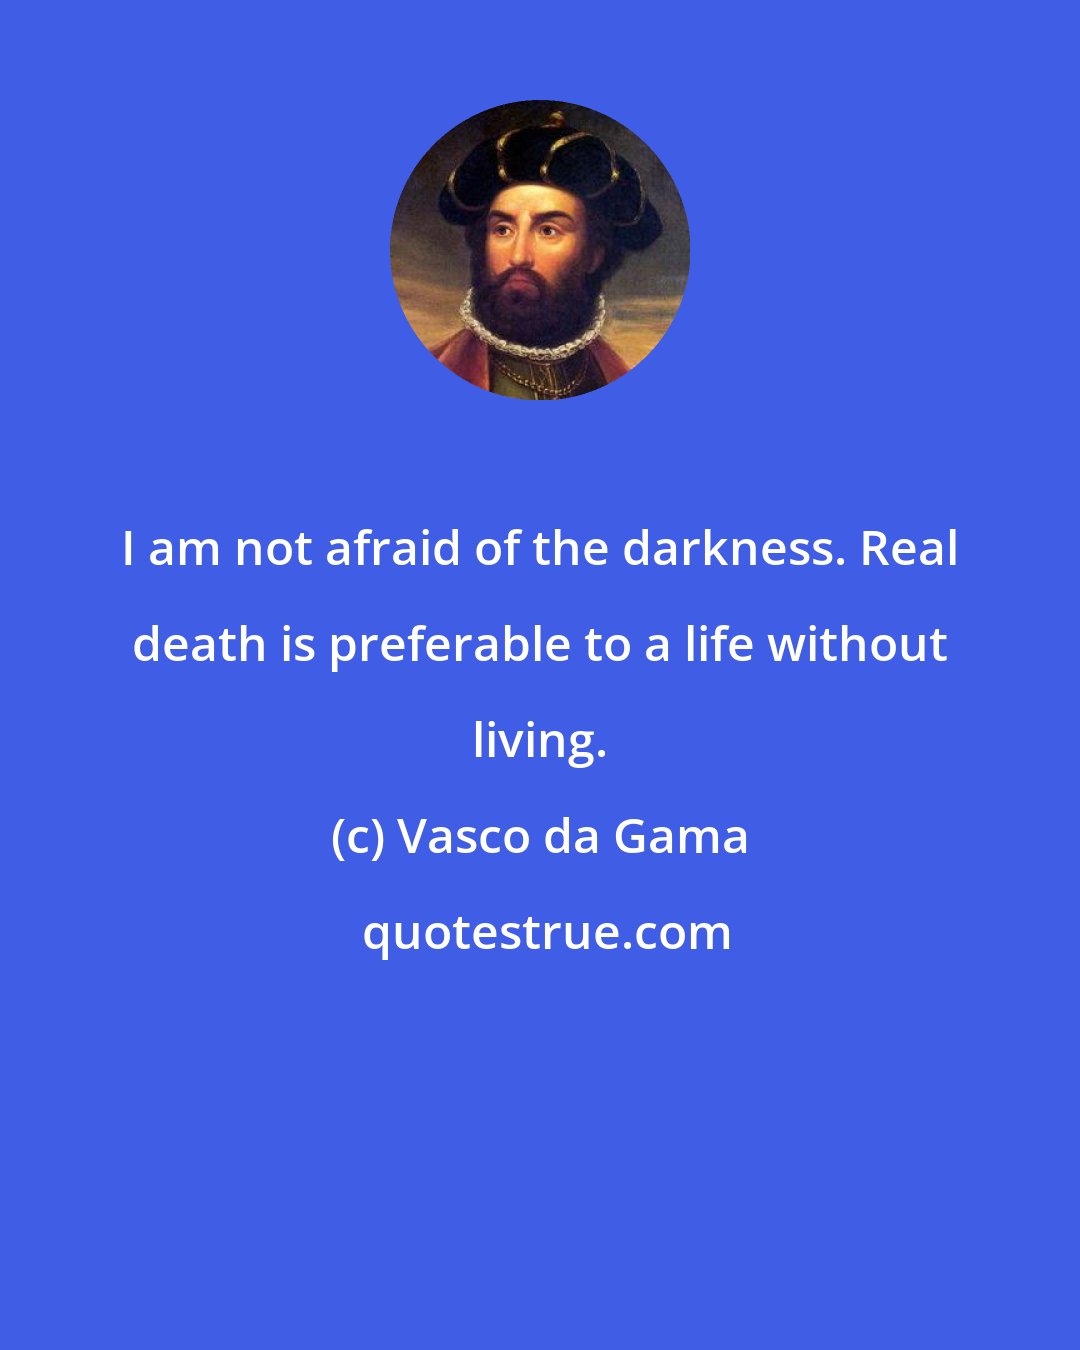 Vasco da Gama: I am not afraid of the darkness. Real death is preferable to a life without living.